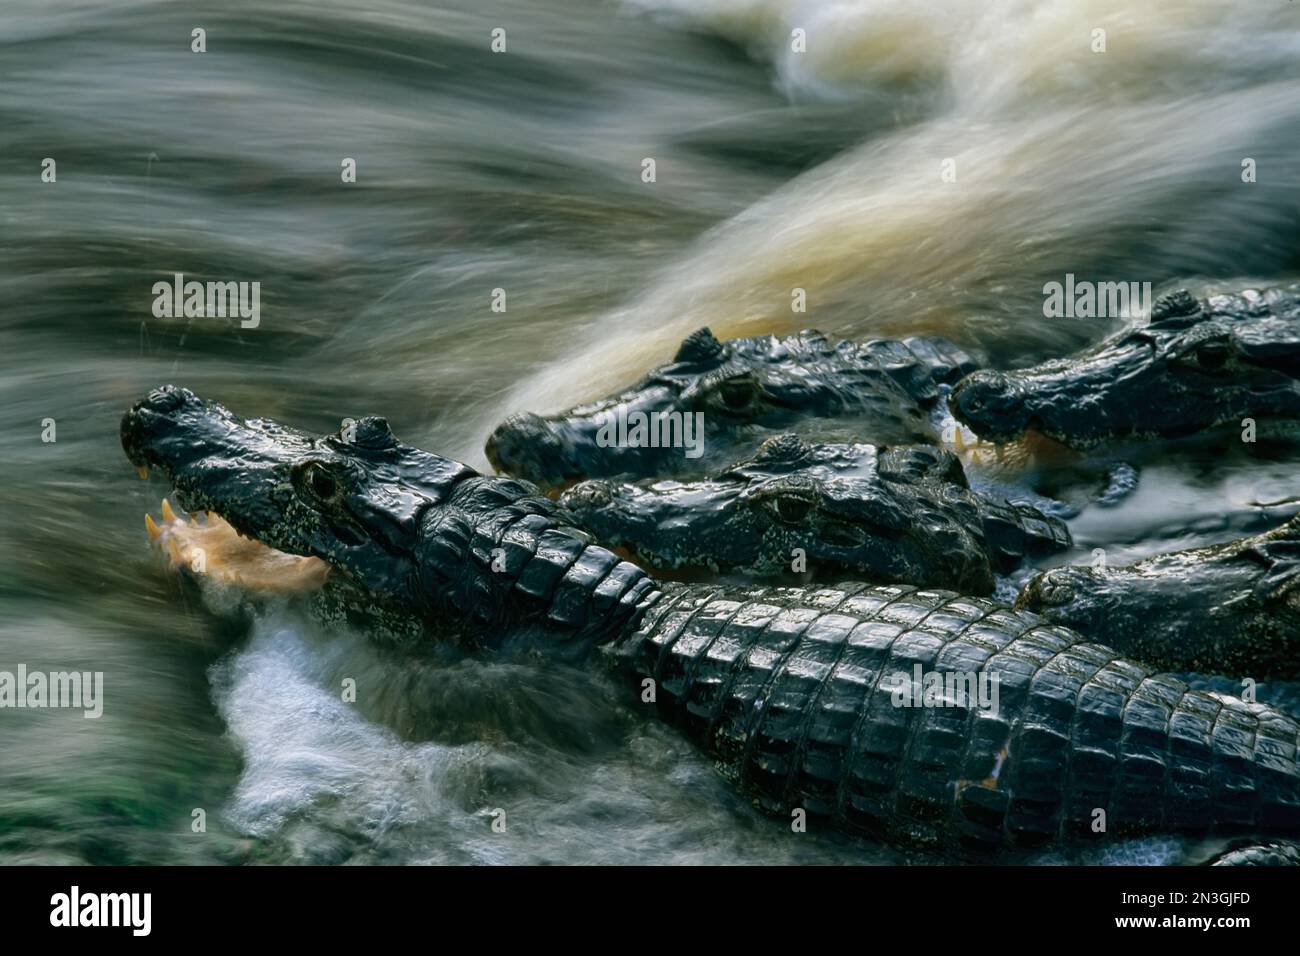 Speckled caimans (Caiman Crocodilus) wait for unsuspecting fish in Pantanal waters; Pantanal, Brazil Stock Photo